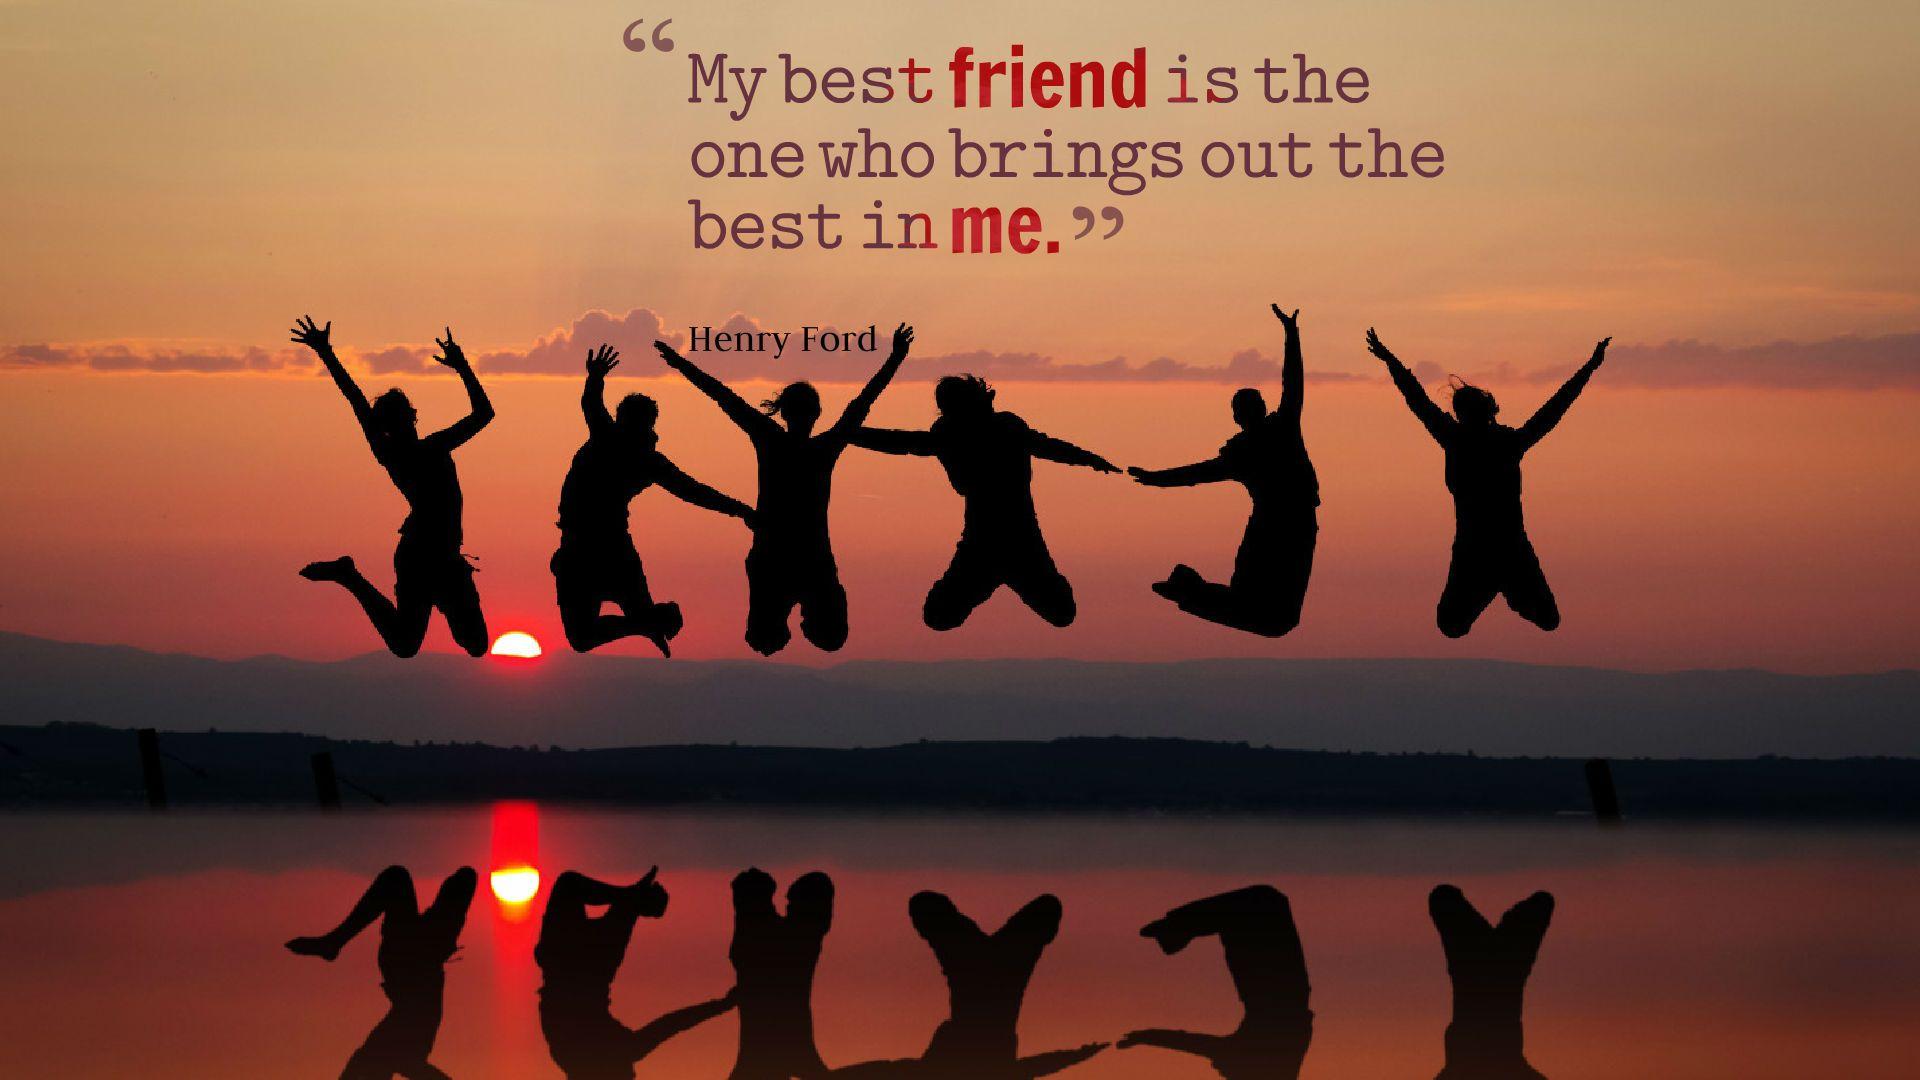 Friendship Quotes Wallpaper HD Background Free Download